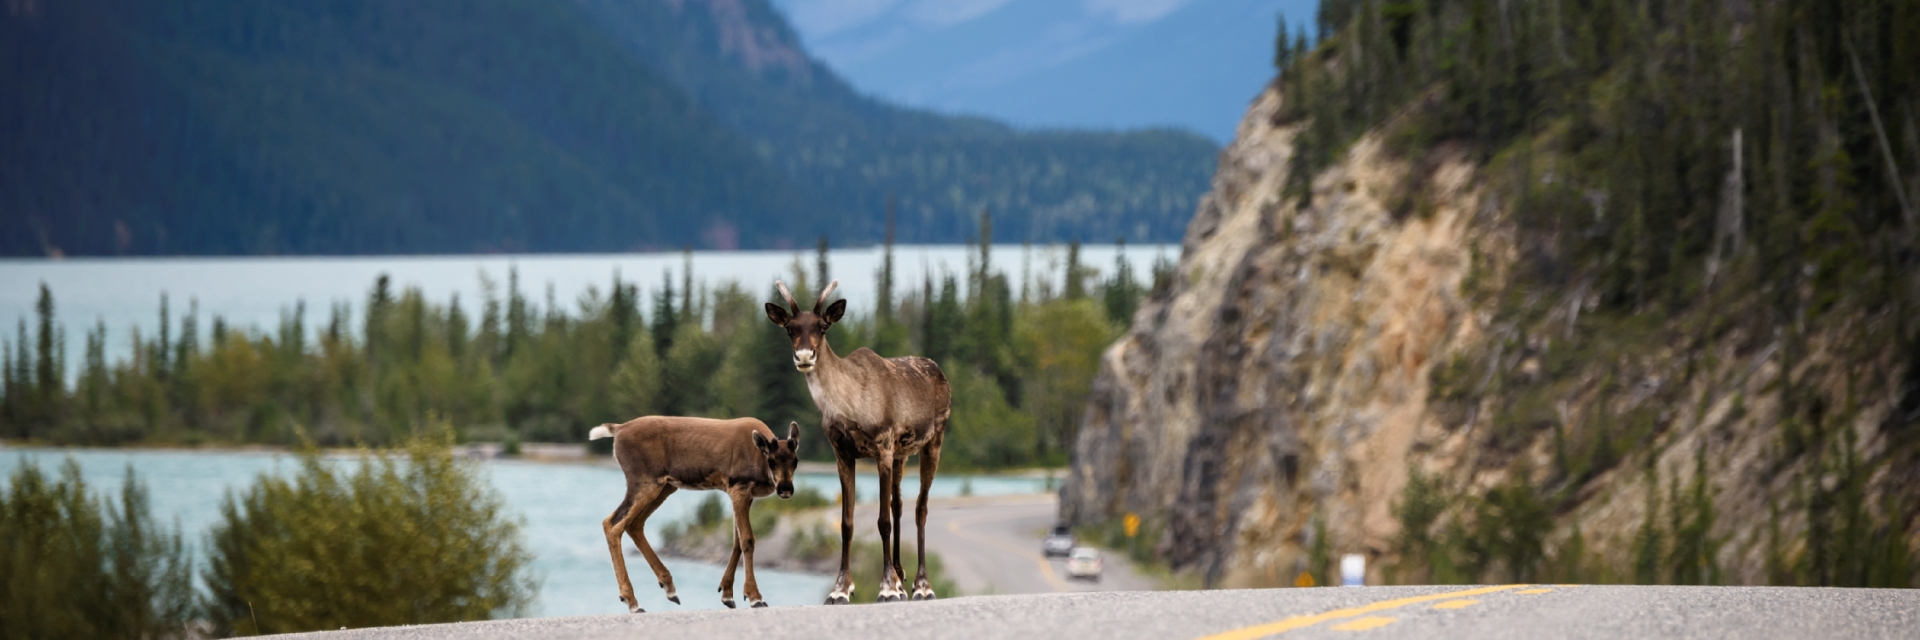 A Caribou cow with her calf search for mineral salts along the Alaska Highway at Muncho Lake, in the Northern Rockies of British Columbia